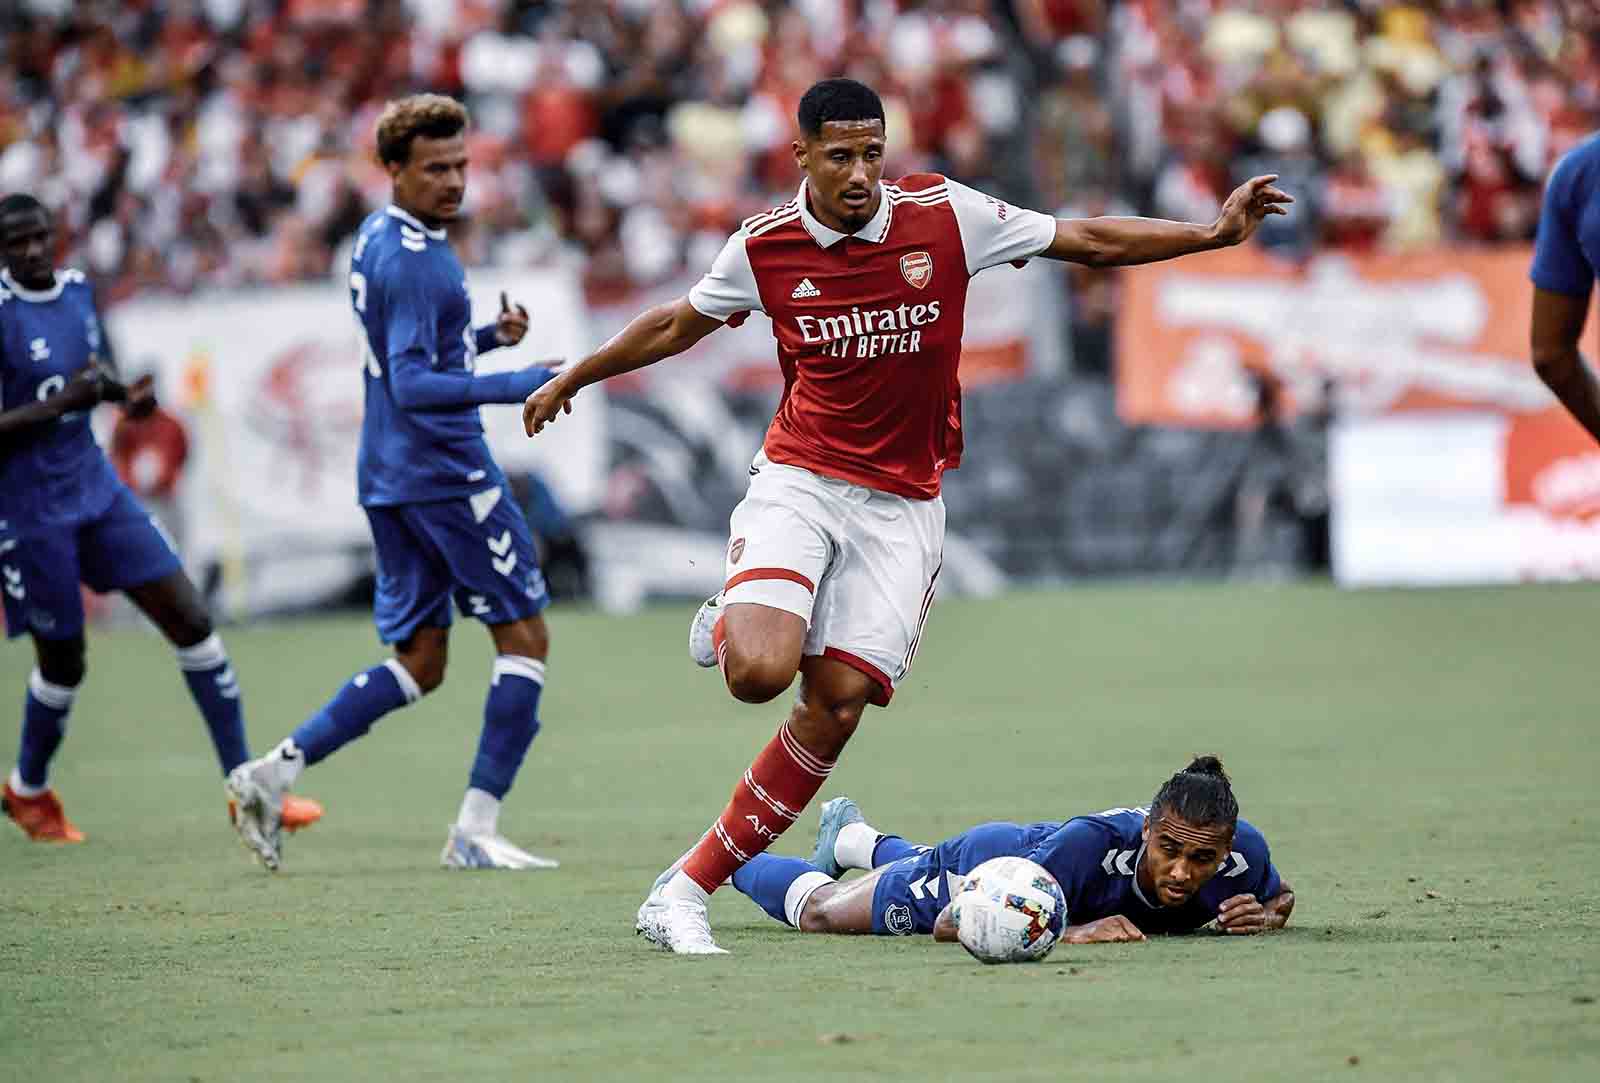 William Saliba playing for Arsenal against Everton in a pre-season friendly, leaving Dominic Calvert-Lewin on the floor